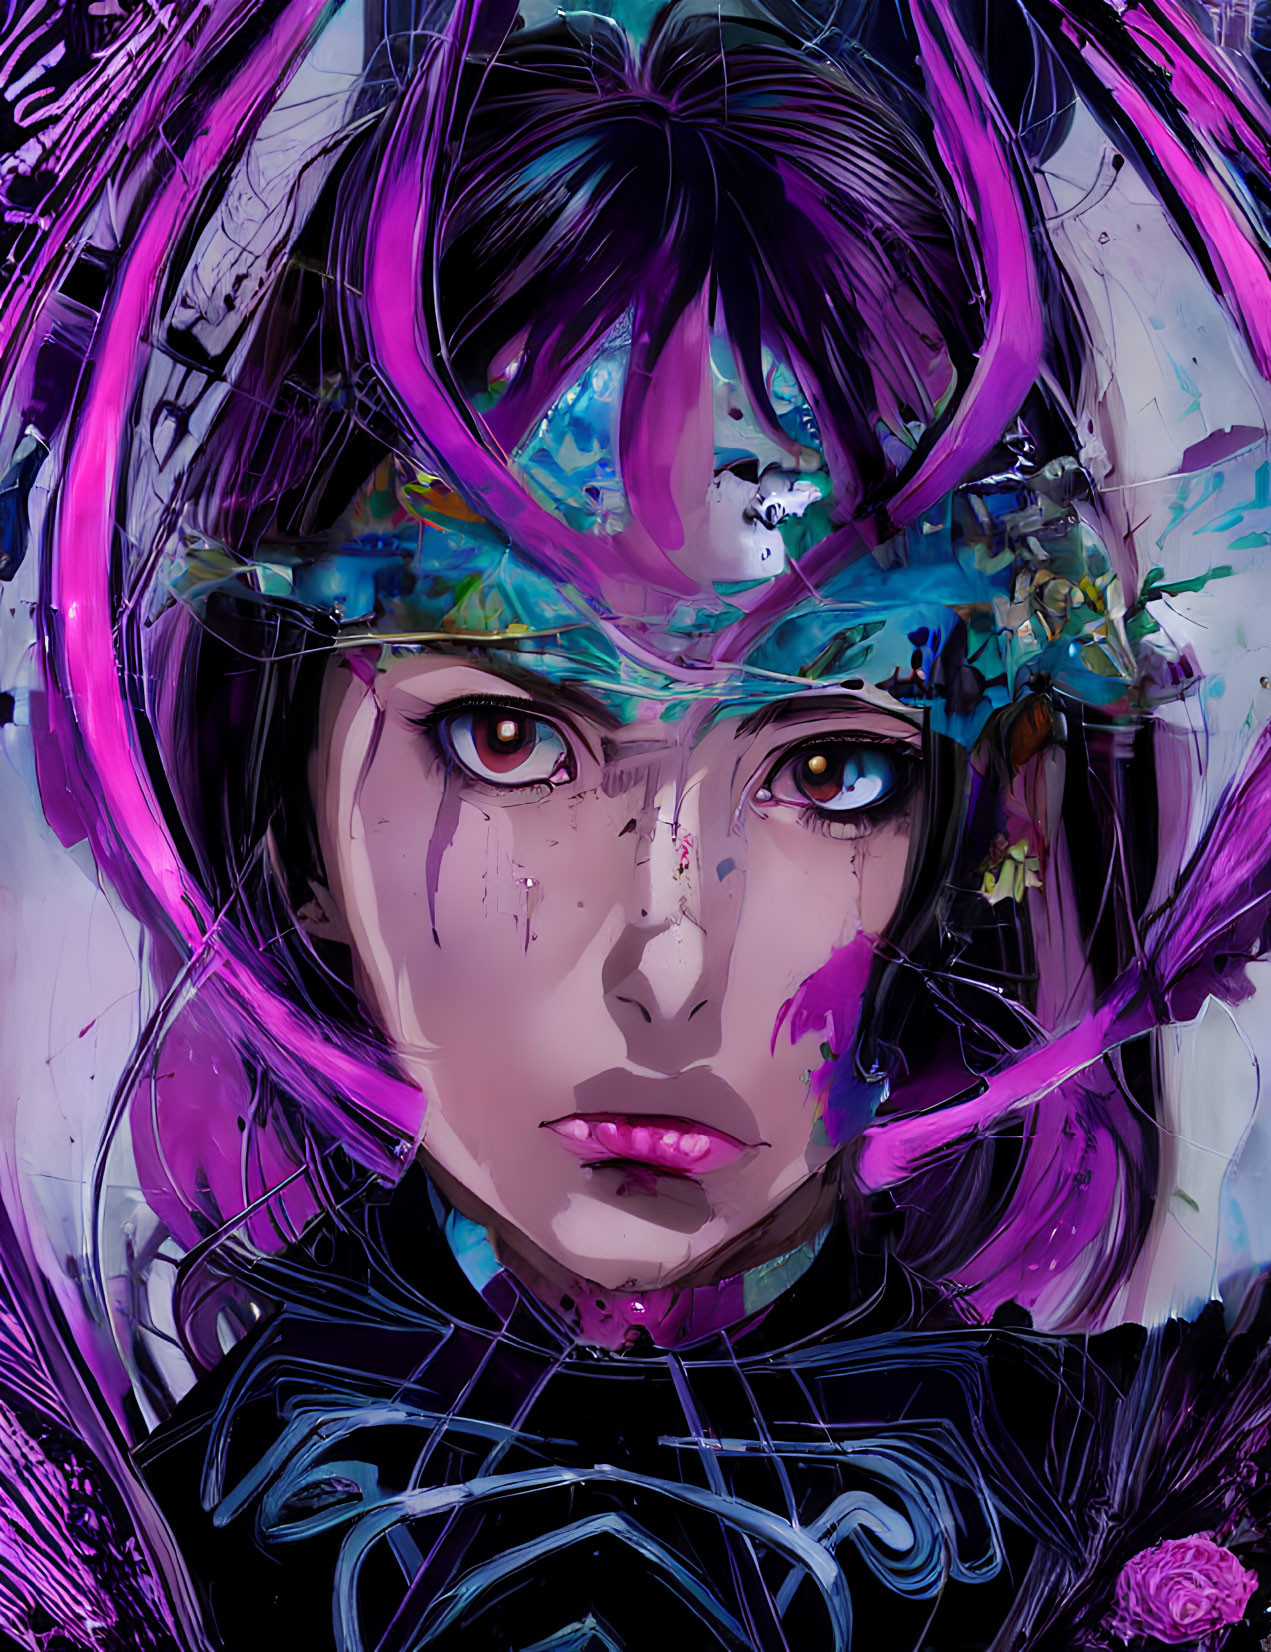 Colorful digital painting of female figure with futuristic helmet and purple hair